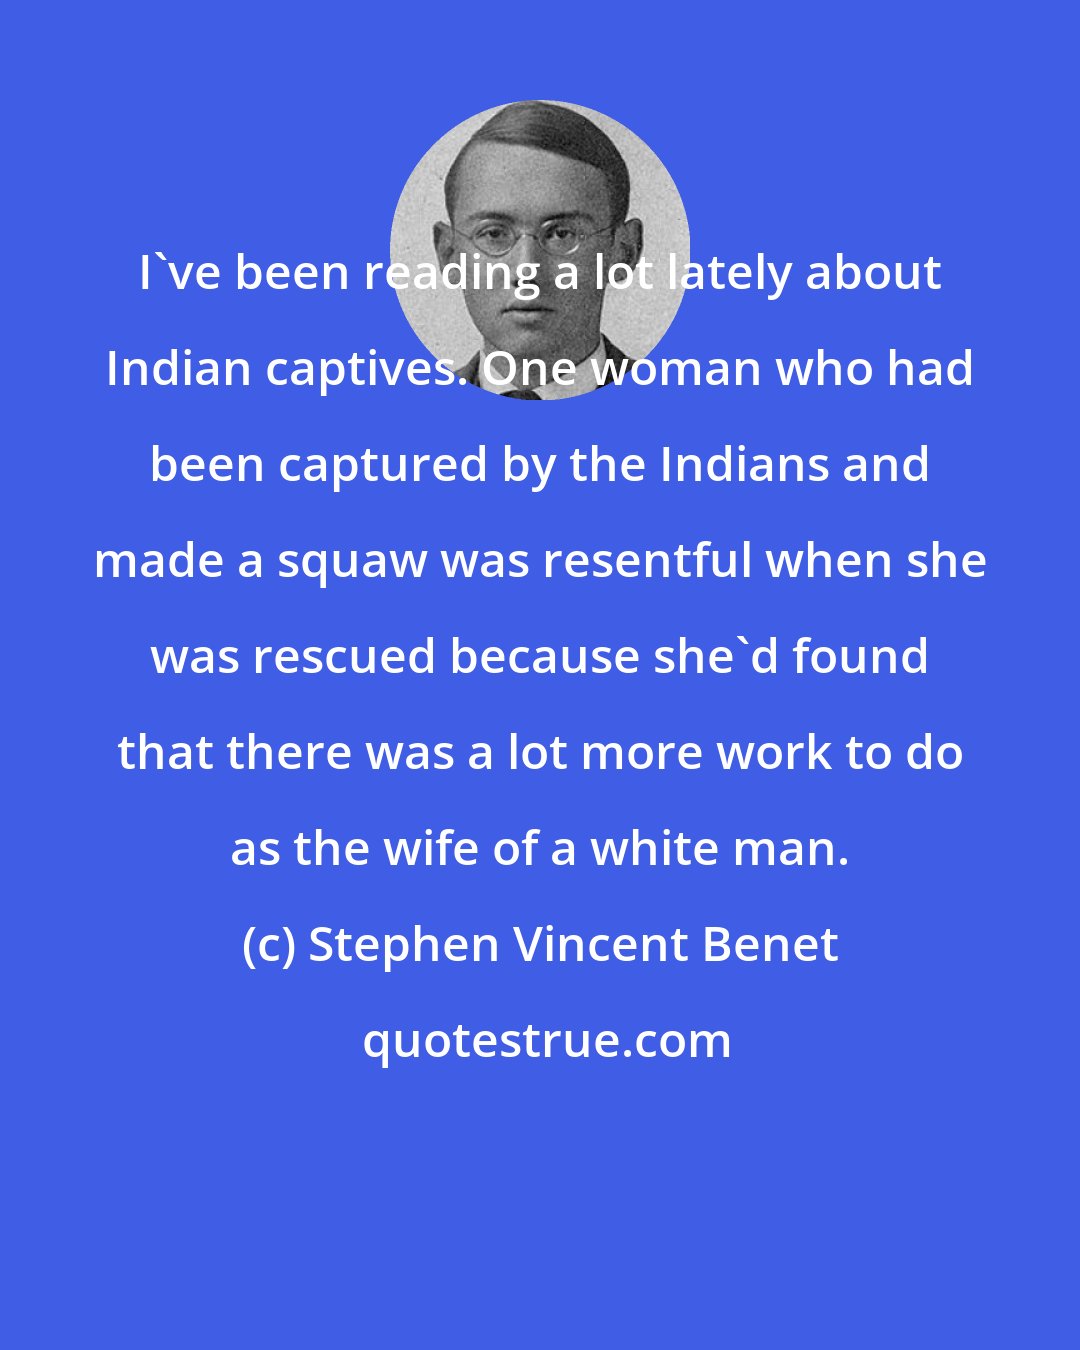 Stephen Vincent Benet: I've been reading a lot lately about Indian captives. One woman who had been captured by the Indians and made a squaw was resentful when she was rescued because she'd found that there was a lot more work to do as the wife of a white man.